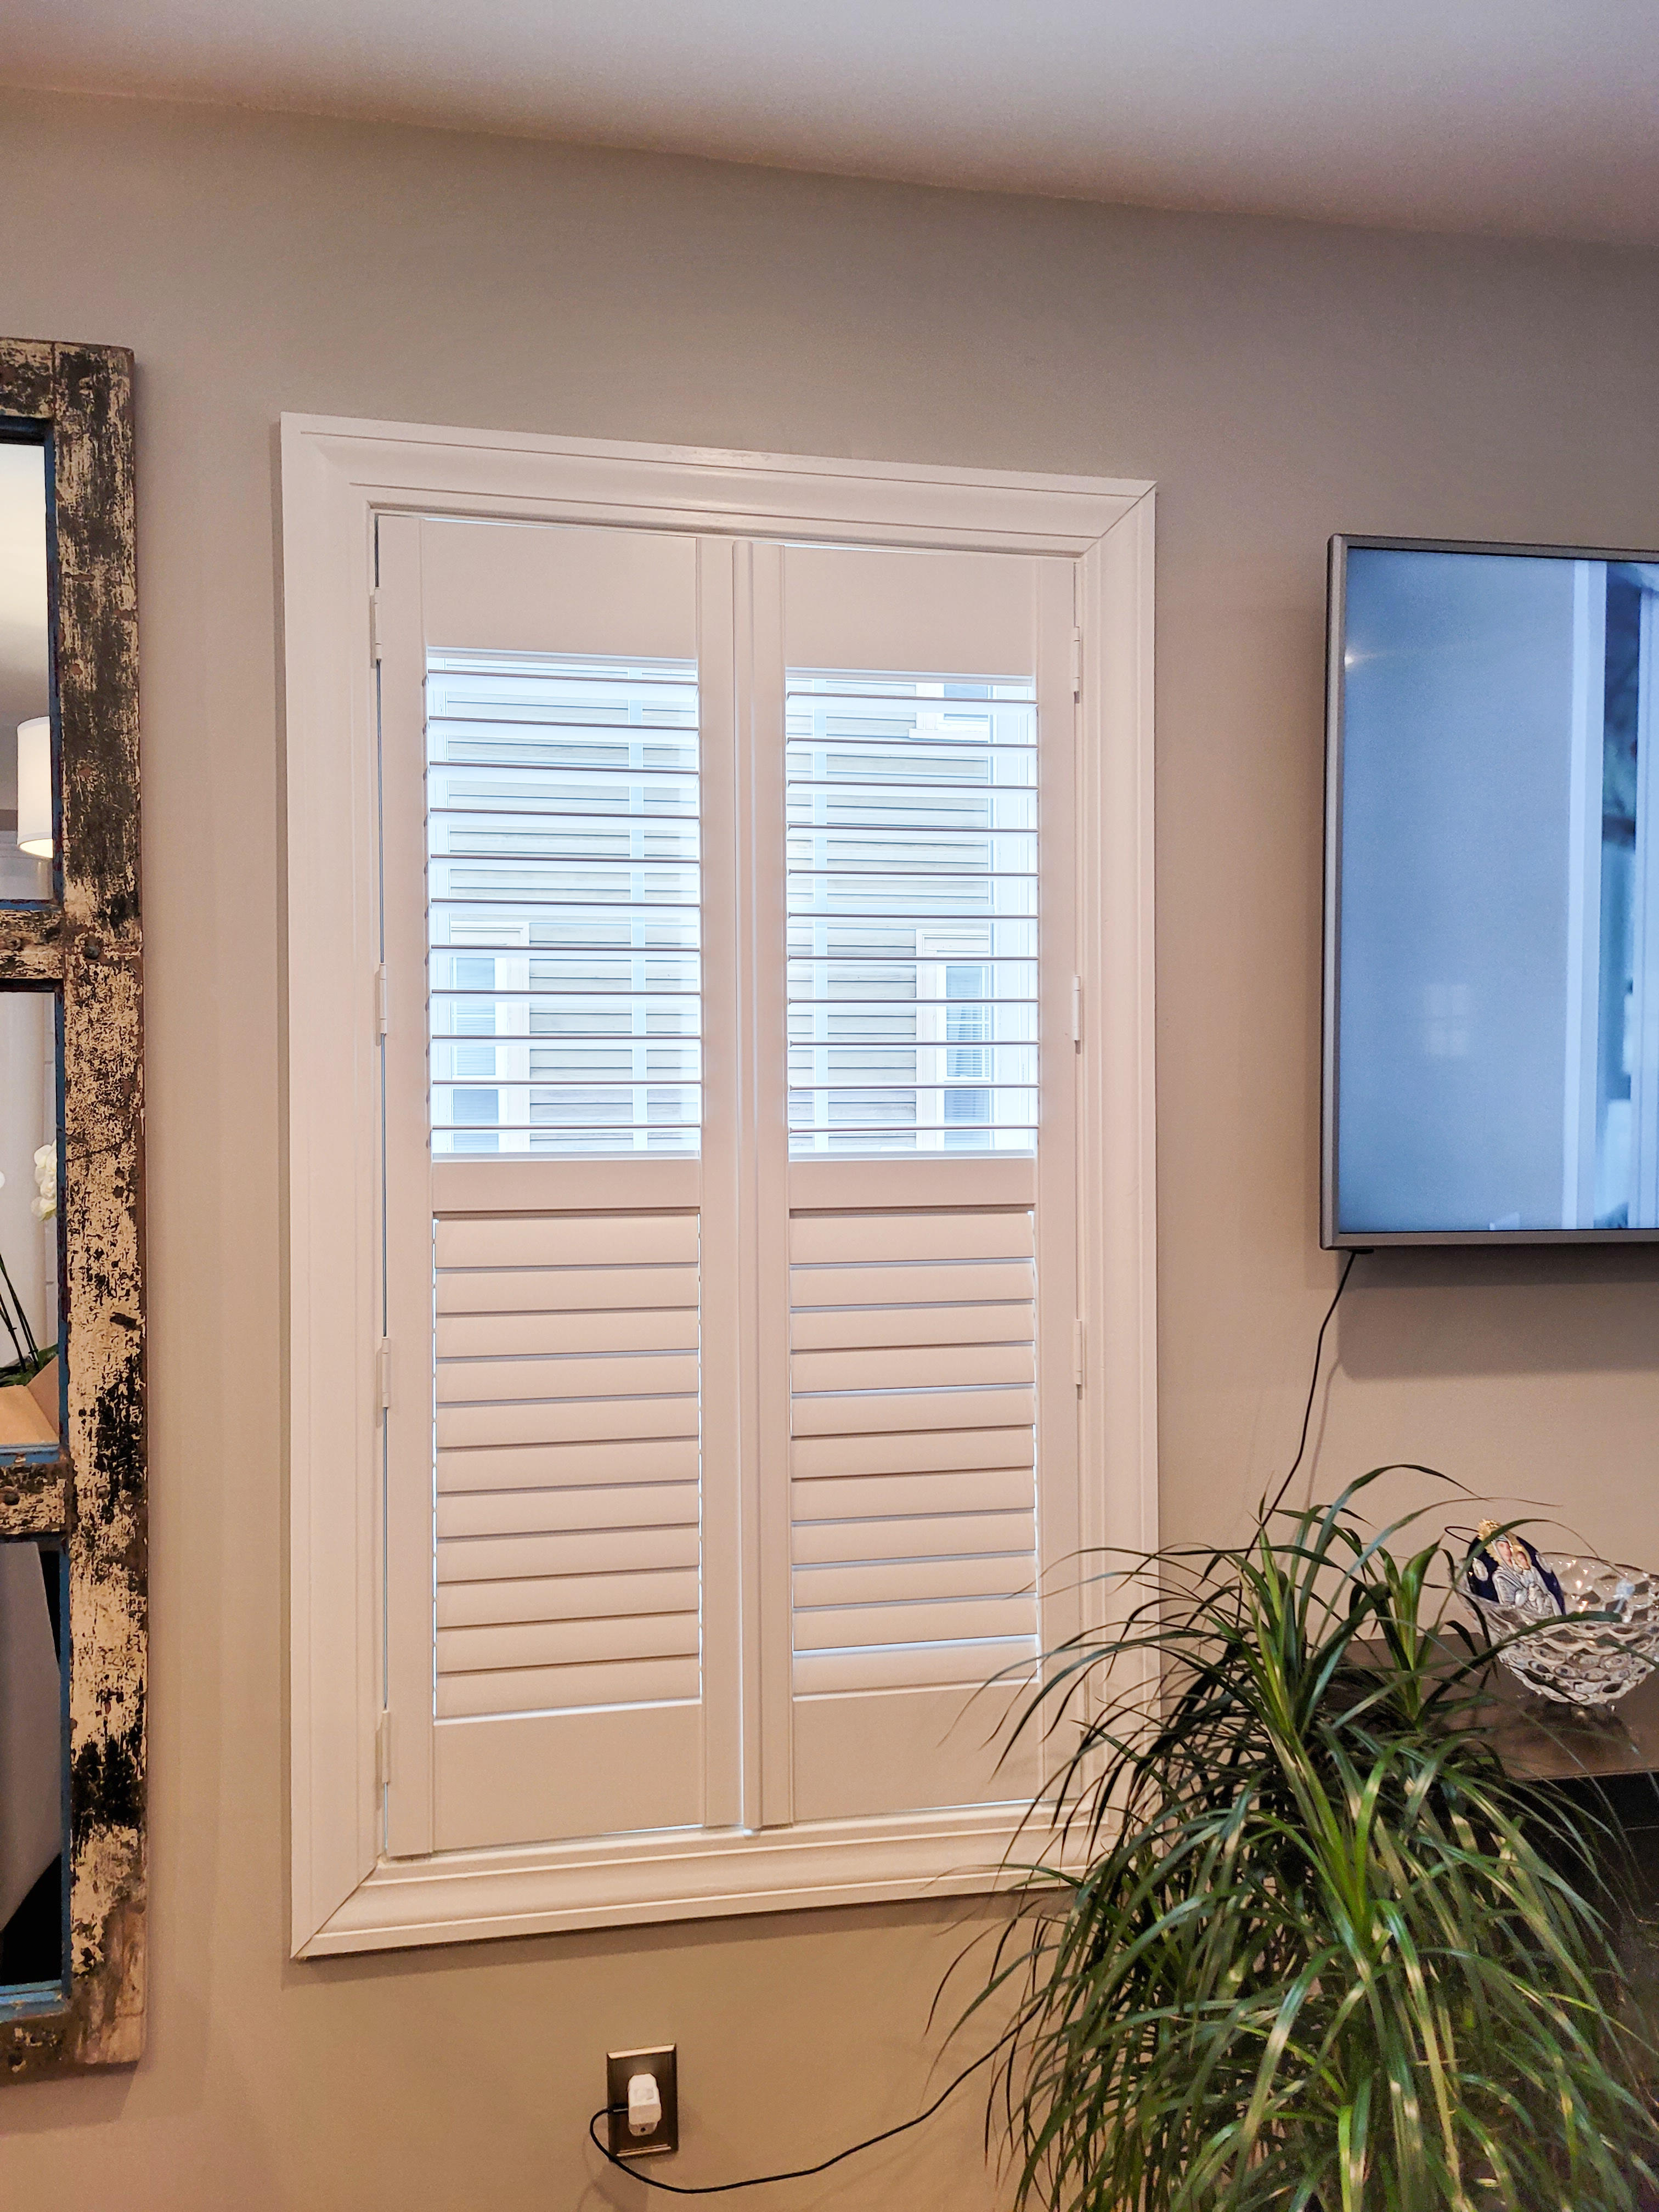 Control light and privacy with beautiful plantation shutters. Danvers, MA